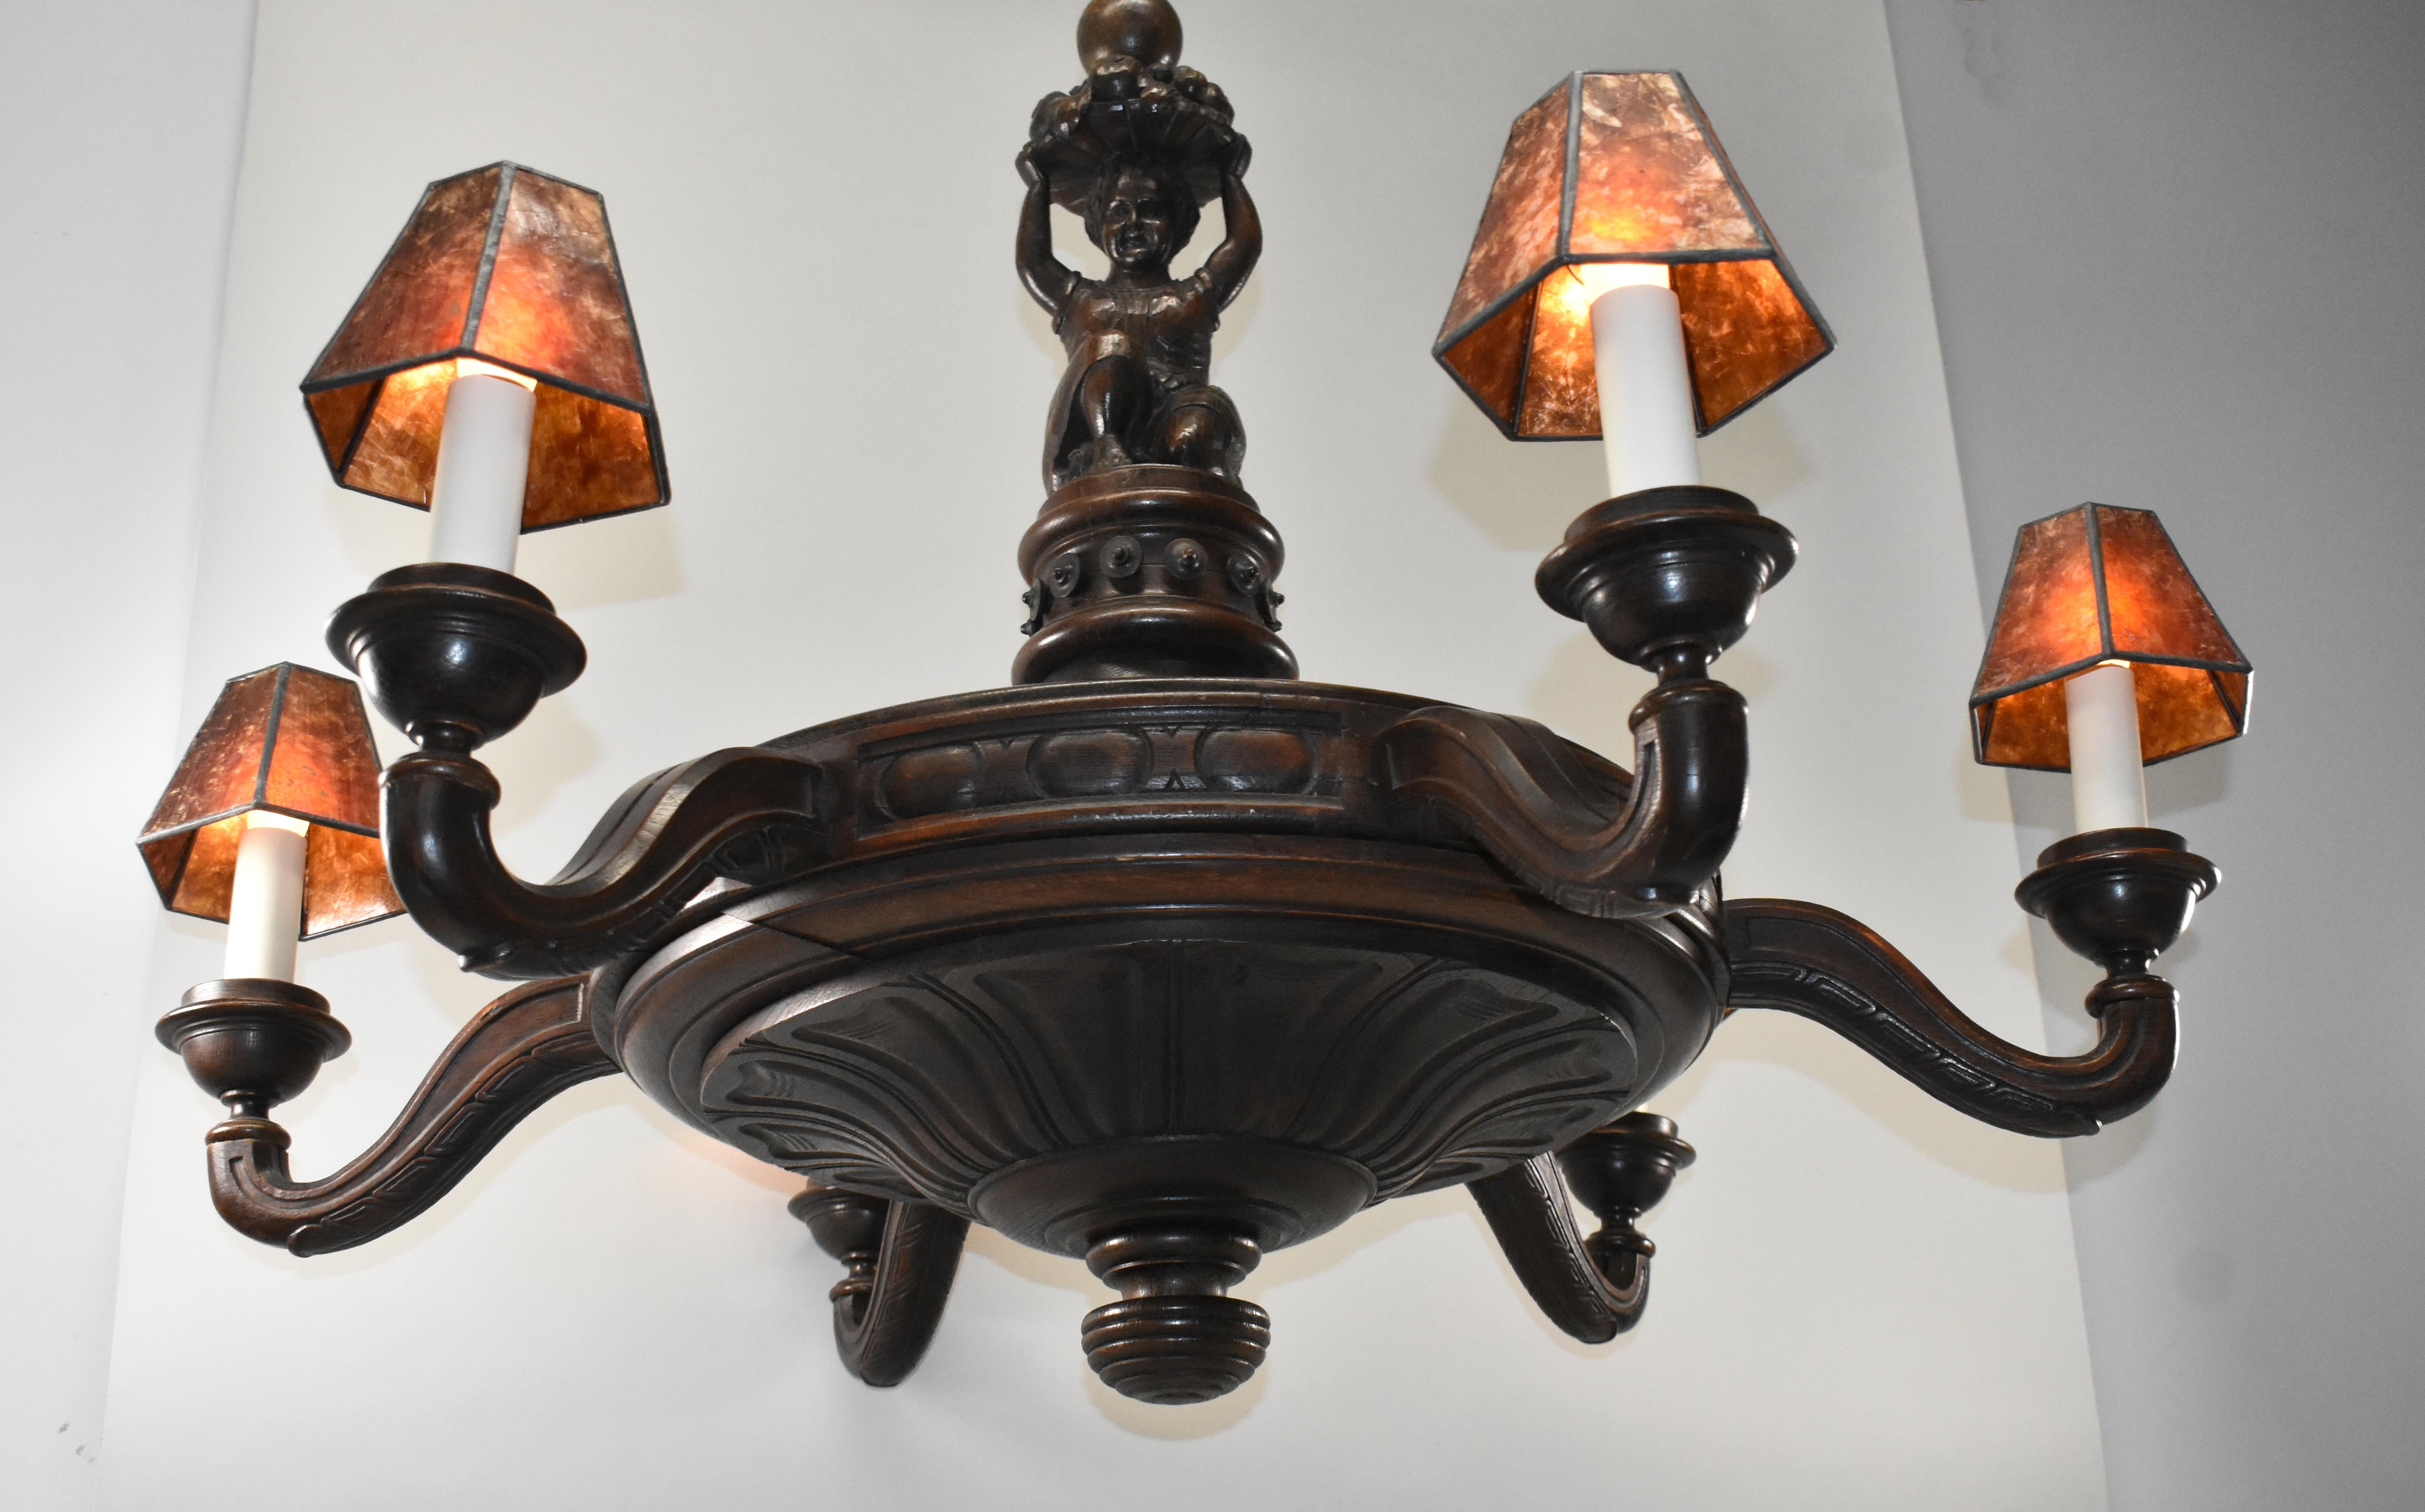 Antique oak large scale tavern, pub or wine cellar chandelier circa 1920s. Original finish. Hand carved full figure of a child holding a basket in center. Six carved arms that hold mica shades. Has been rewired. Dimensions: 32